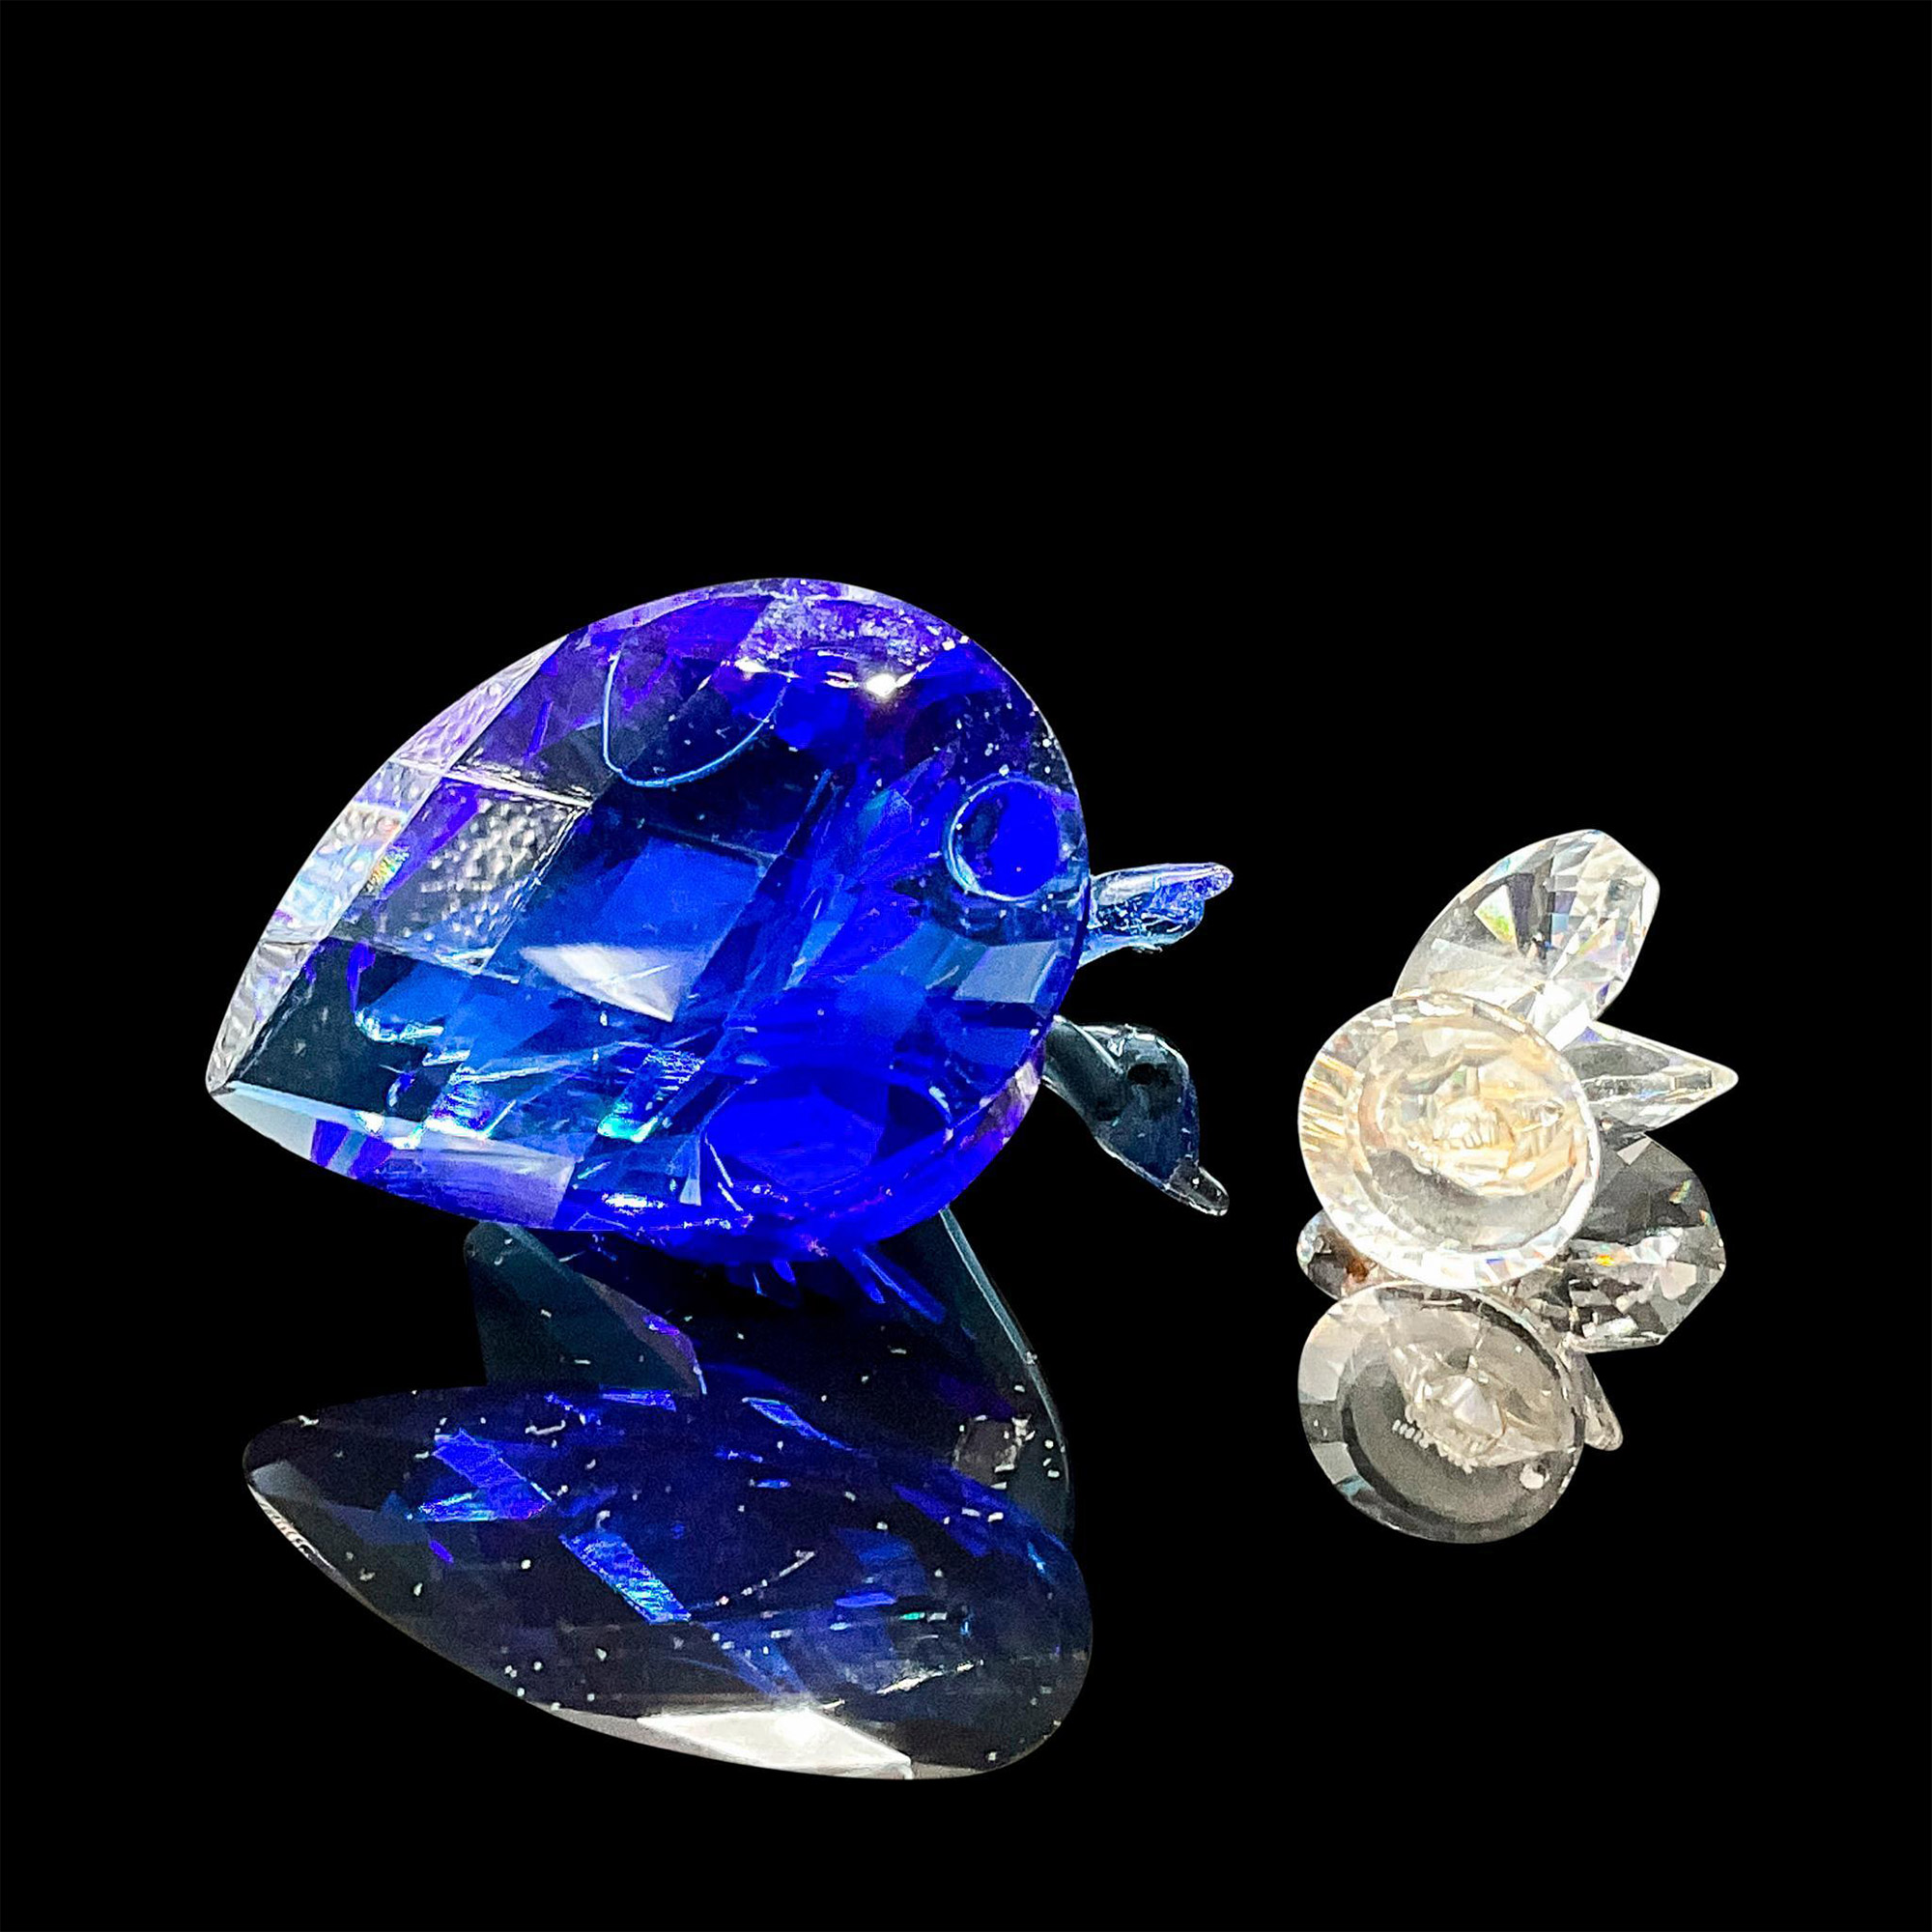 2pc Crystal Figurine Grouping Iris Arc Butterfly & Blue Swan - Image 3 of 3